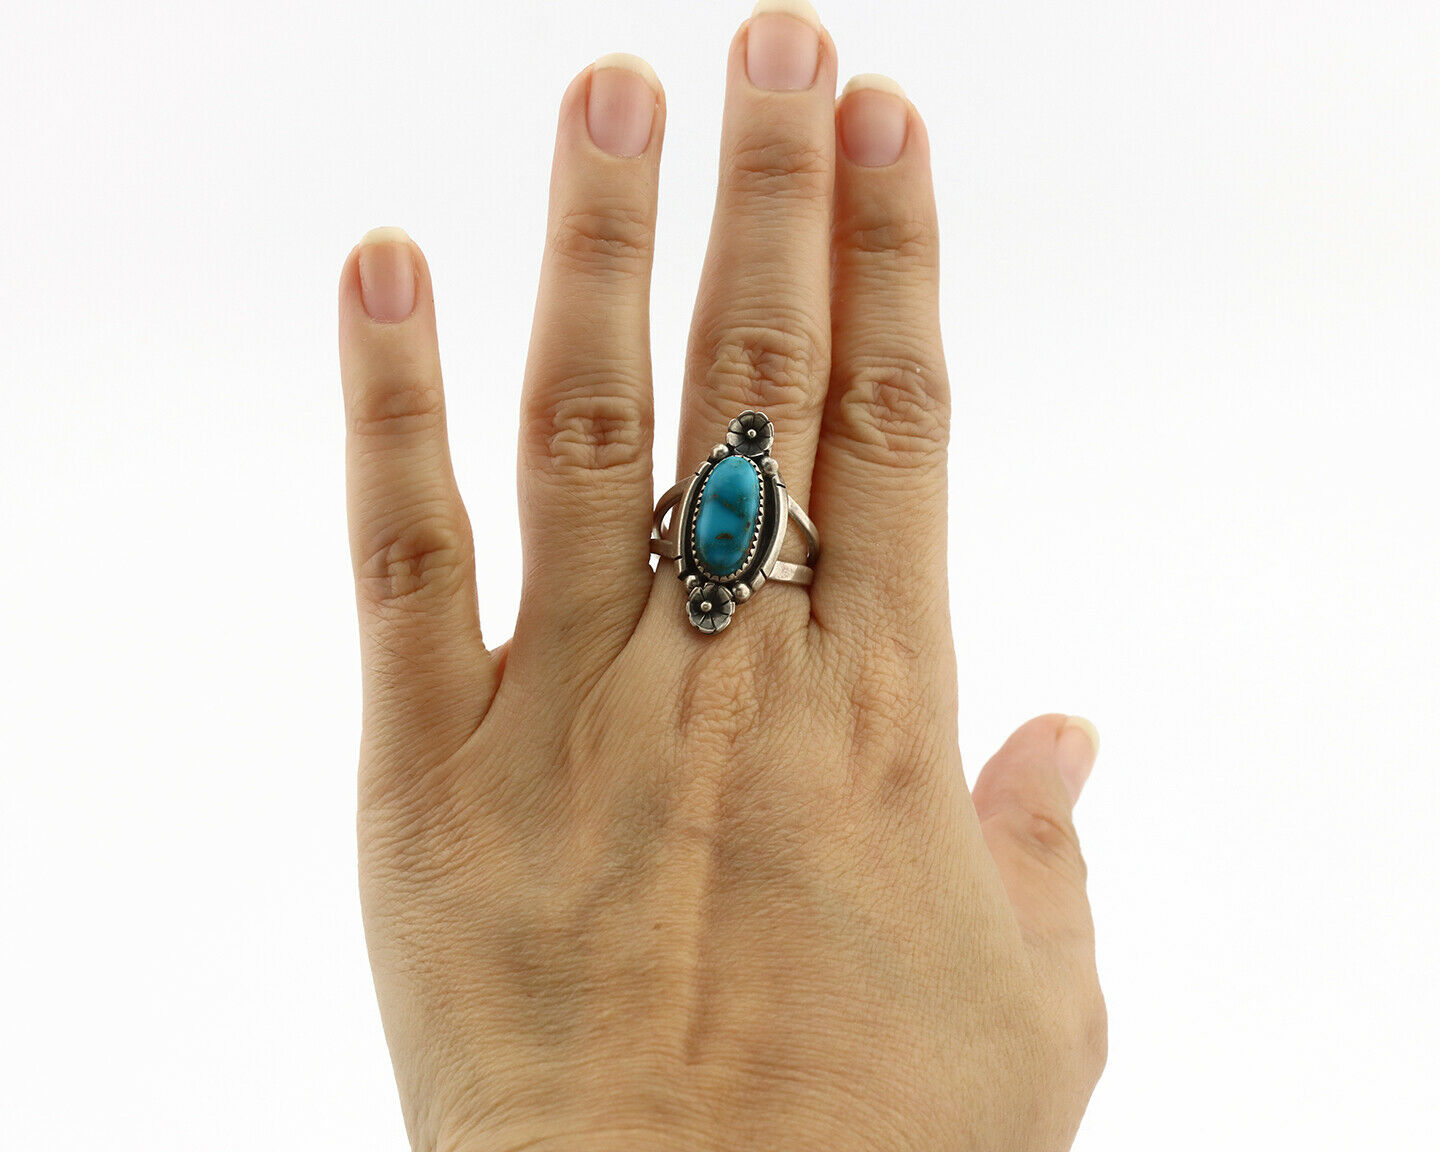 Navajo Ring .925 Silver Natural Blue Turquoise Native American Artist C.1980's